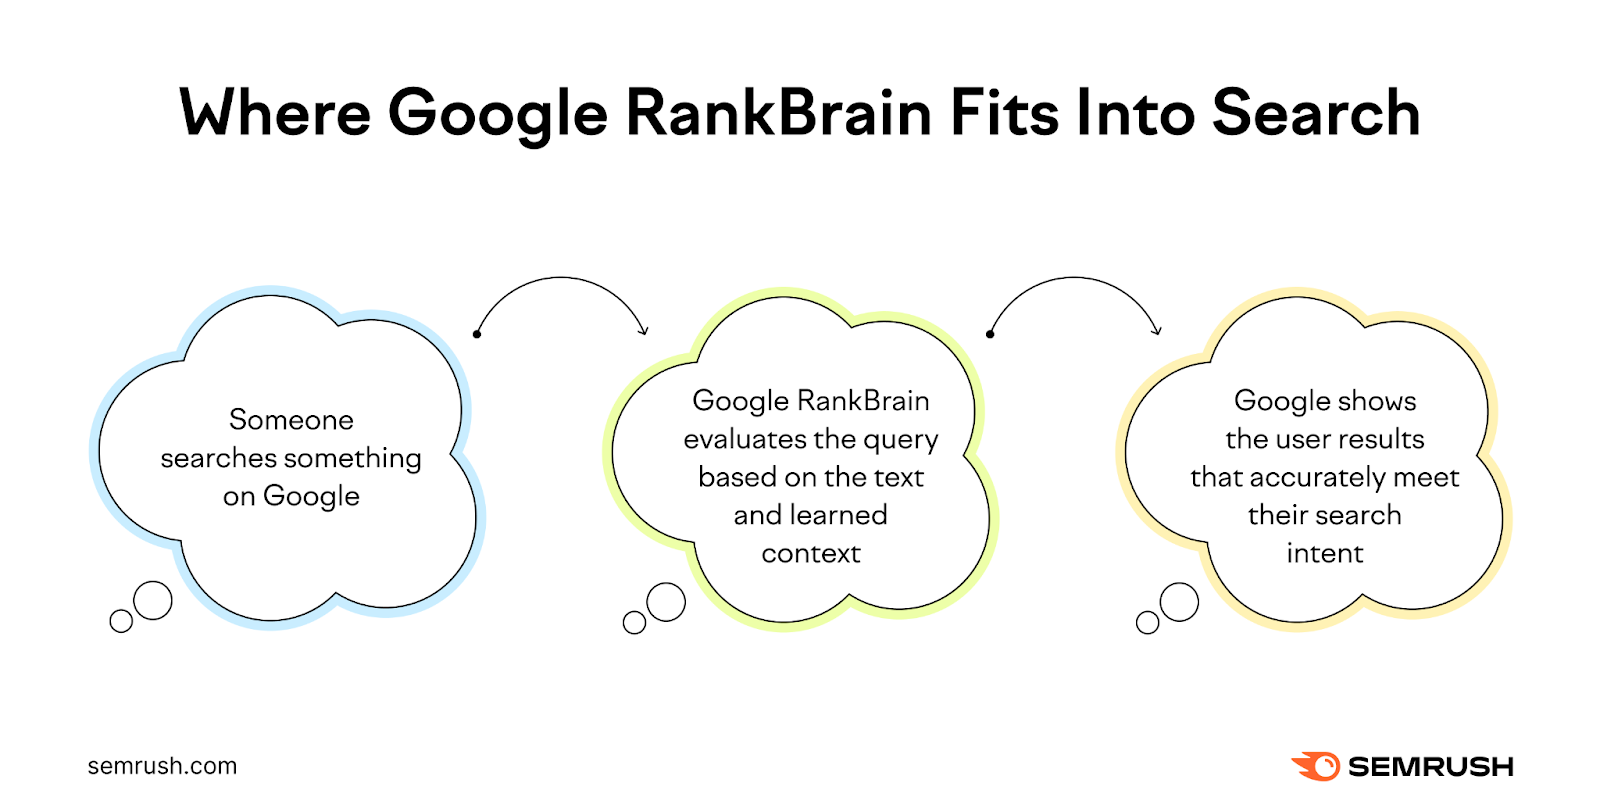 A visual showing where Google RankBrain fits into search